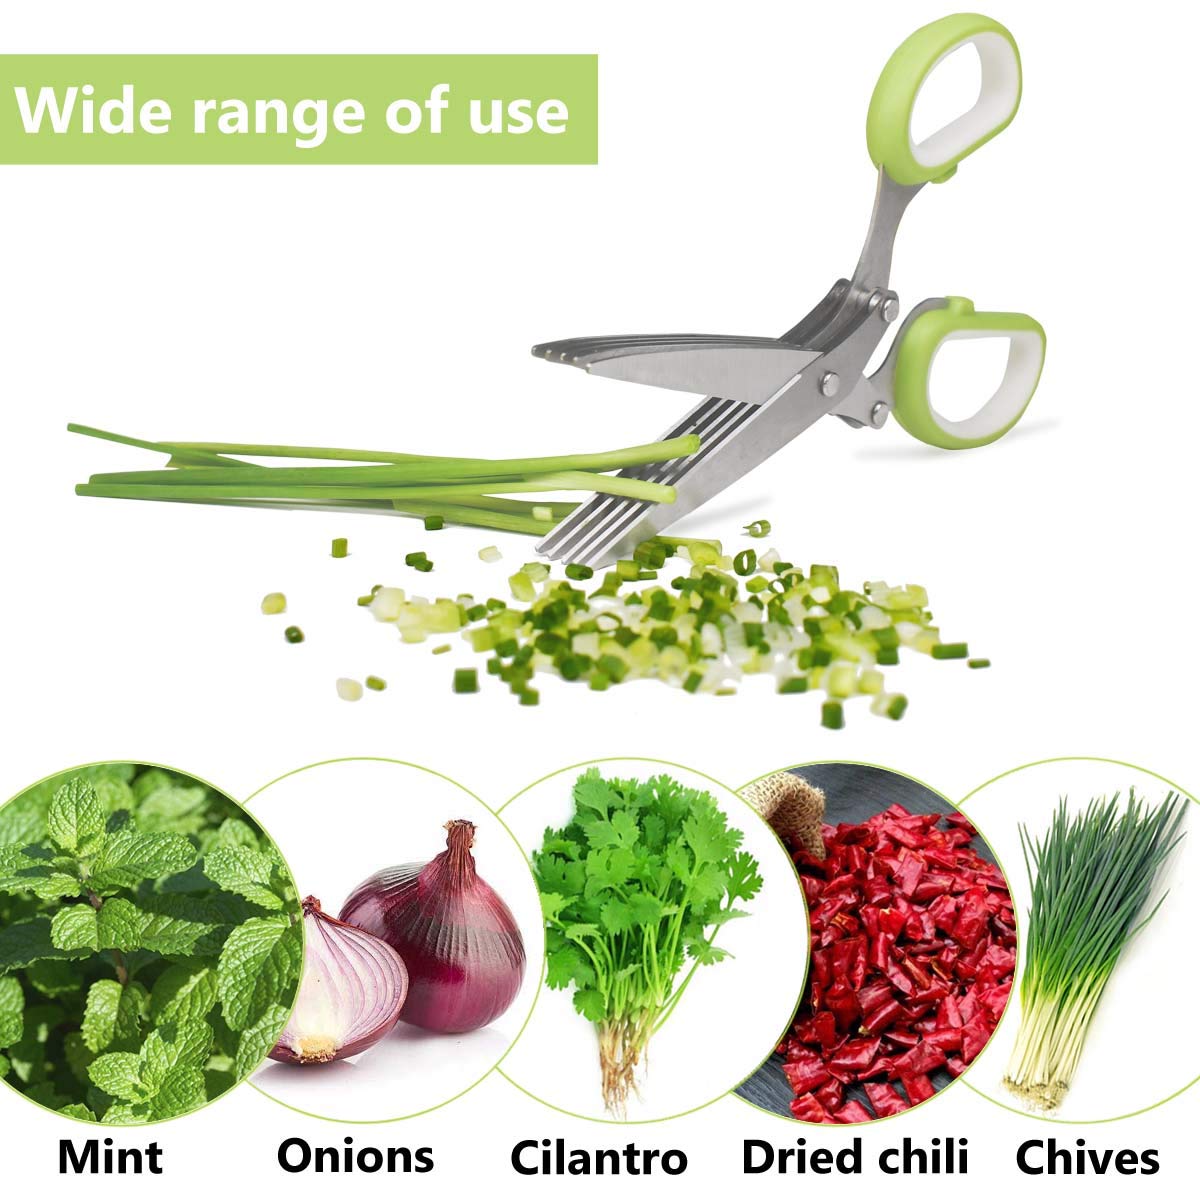 Herb Cutter Scissors 5 Blade Scissors Kitchen Multipurpose Cutting Shear with 5 Stainless Steel Blades & Safety Cover & Cleaning Comb Cilantro Scissors Sharp Shredding Shears Herb Scissors Set (Green)